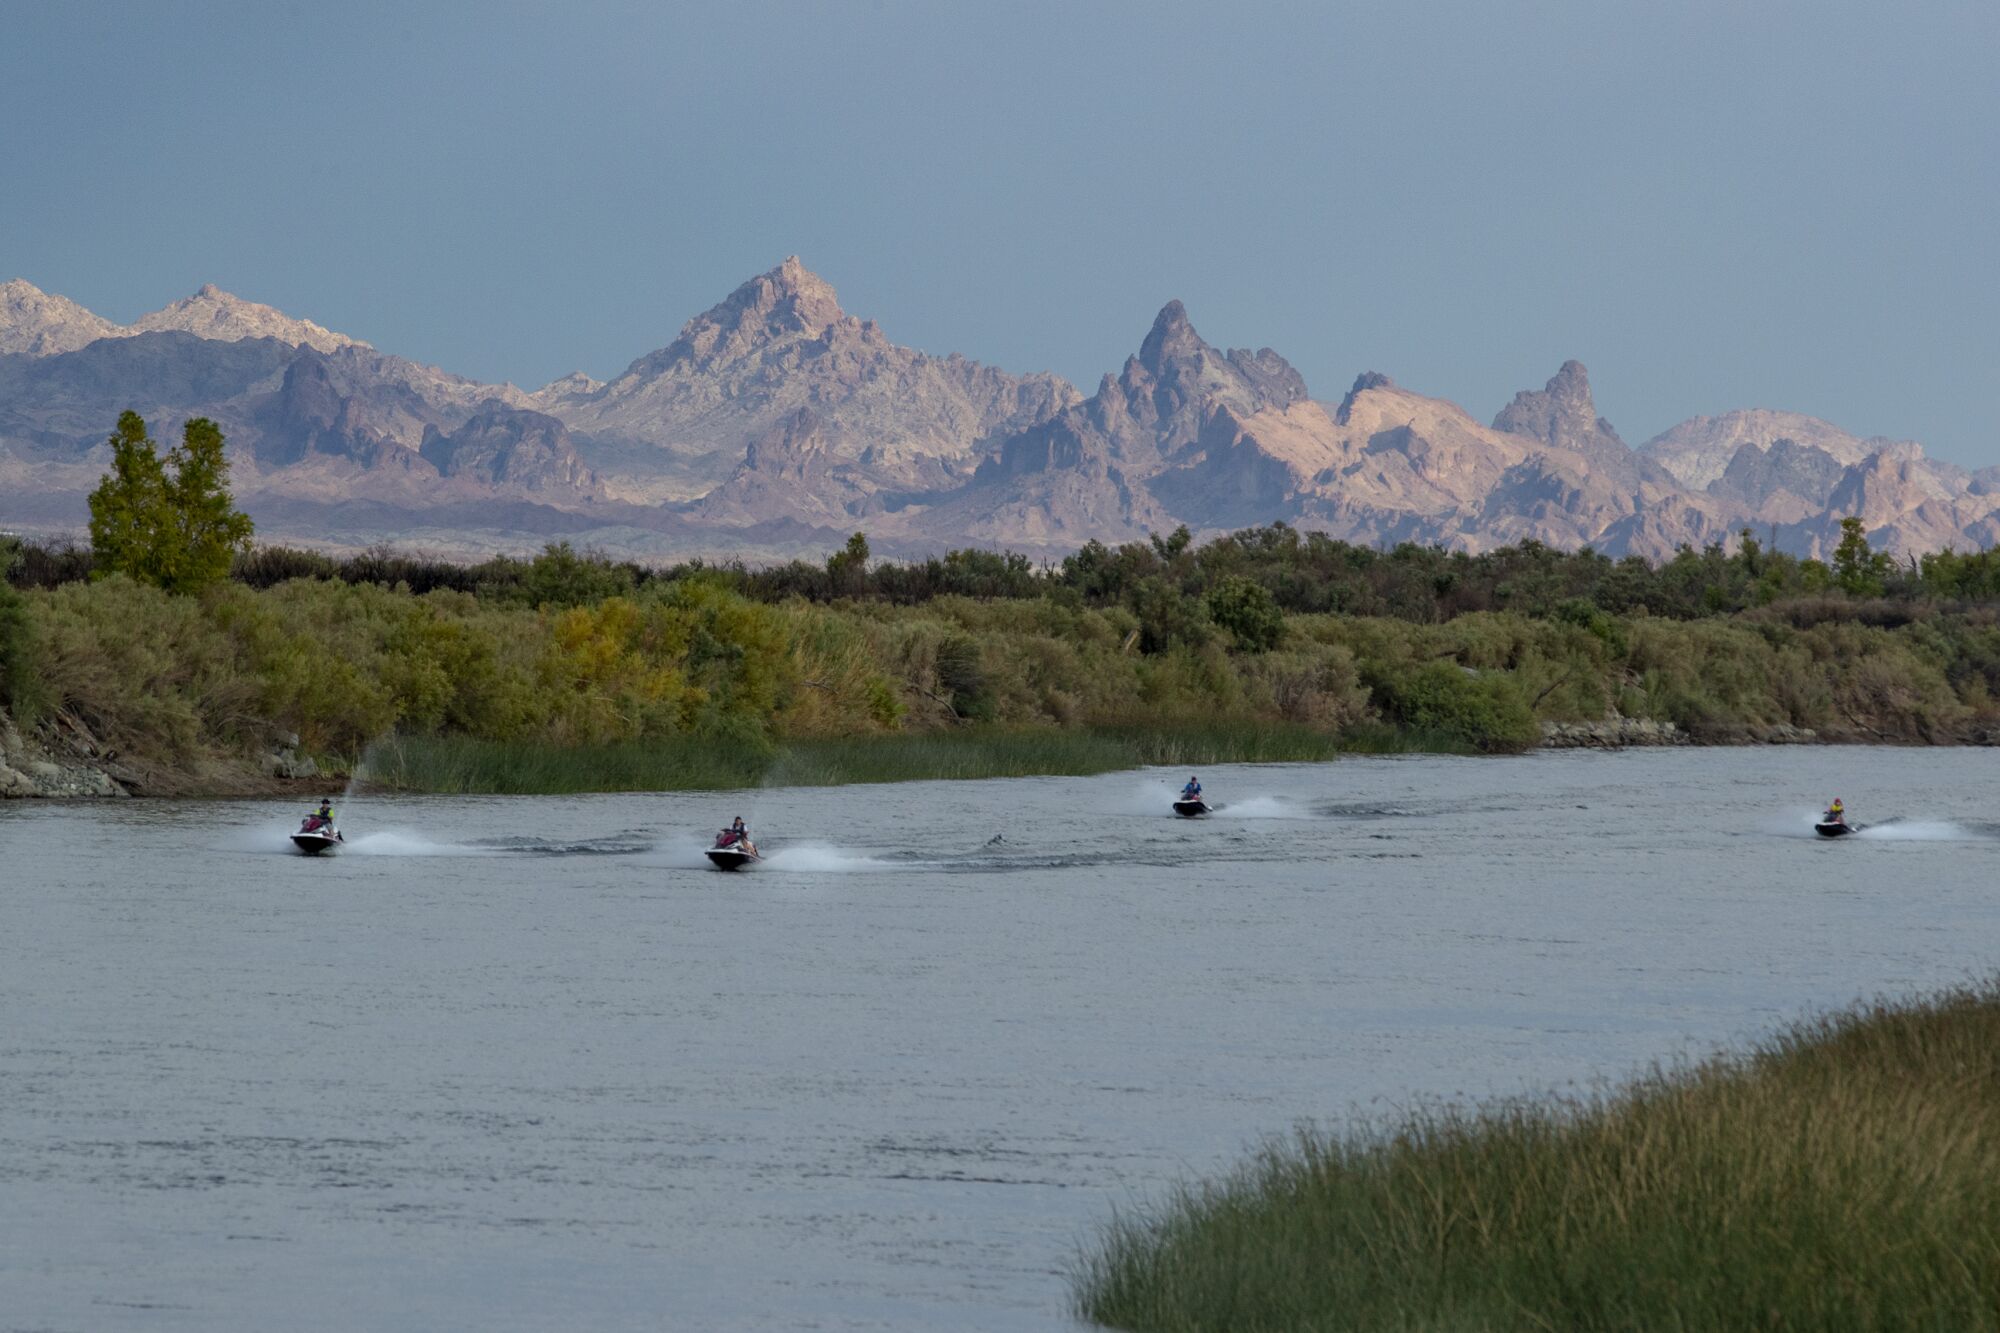 Jet skiers power up the Colorado River against a backdrop of The Needles